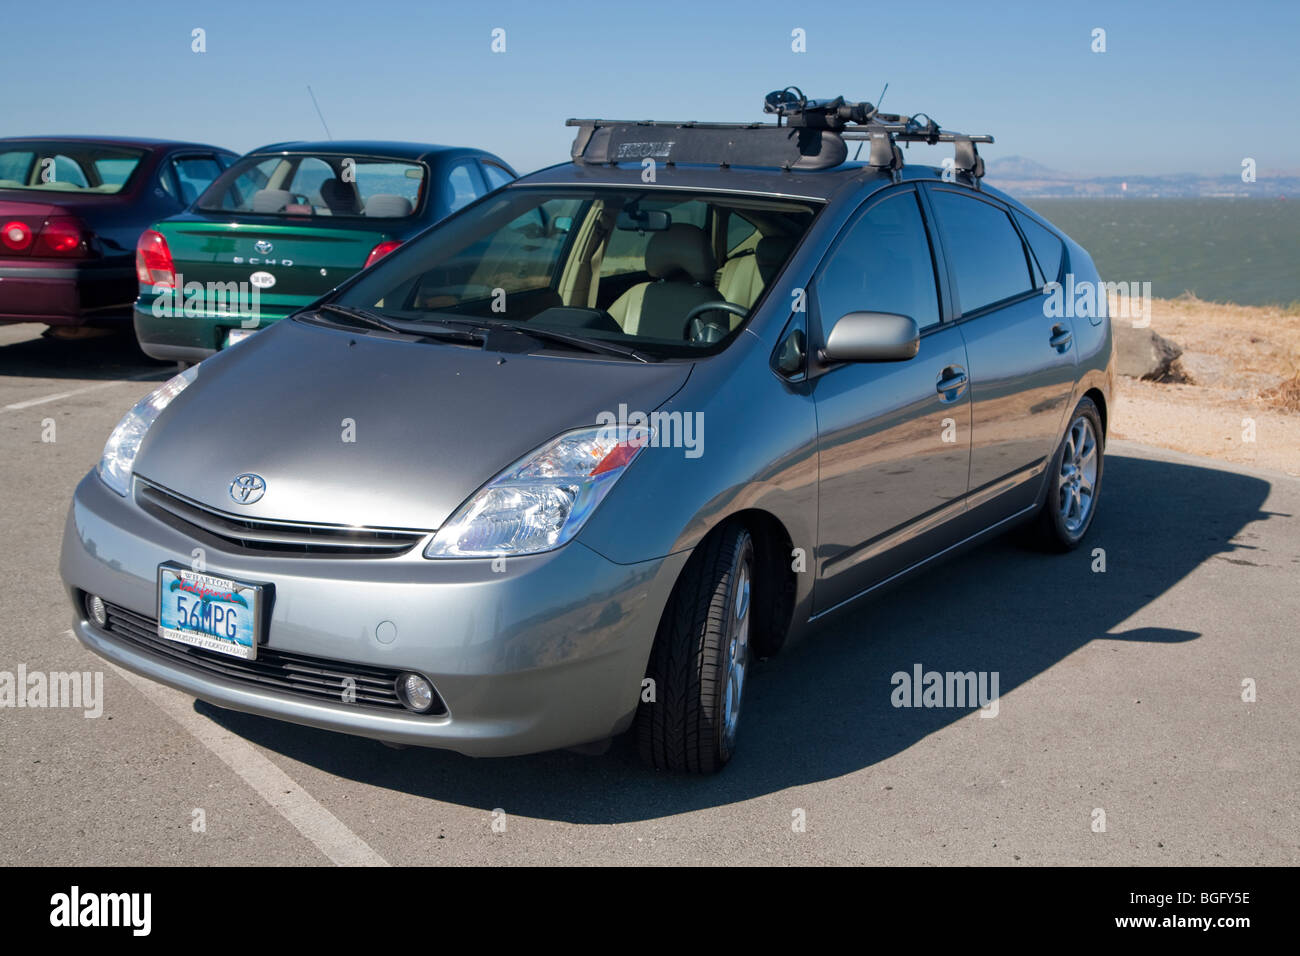 2004 Toyota Prius has a '56 MPG' custom license plate. People pay for customized plates and proceeds support various causes. Stock Photo